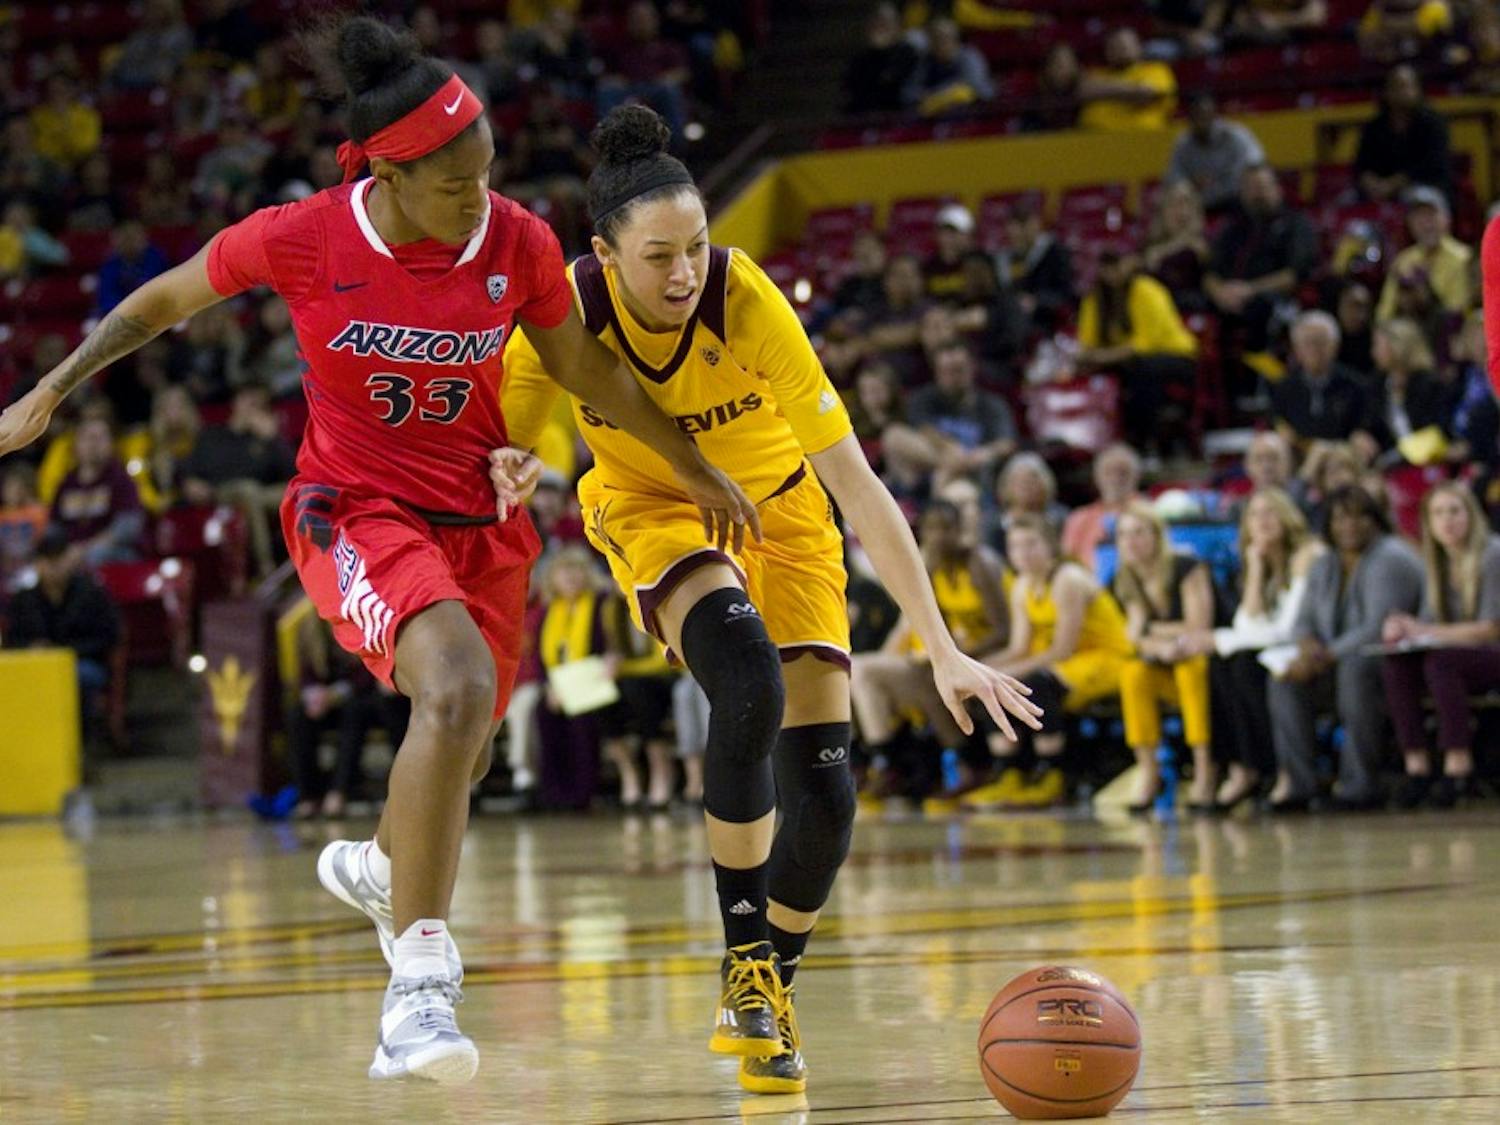 ASU freshman guard Reili Richardson (1) dribbles the ball while being pushed by Wildcats guard JaLea Bennett during a women's basketball game against the University of Arizona Wildcats in Wells Fargo Arena in Tempe, Arizona on Sunday, Feb. 19, 2017. ASU won the game 67-54. (Josh Orcutt/State Press)